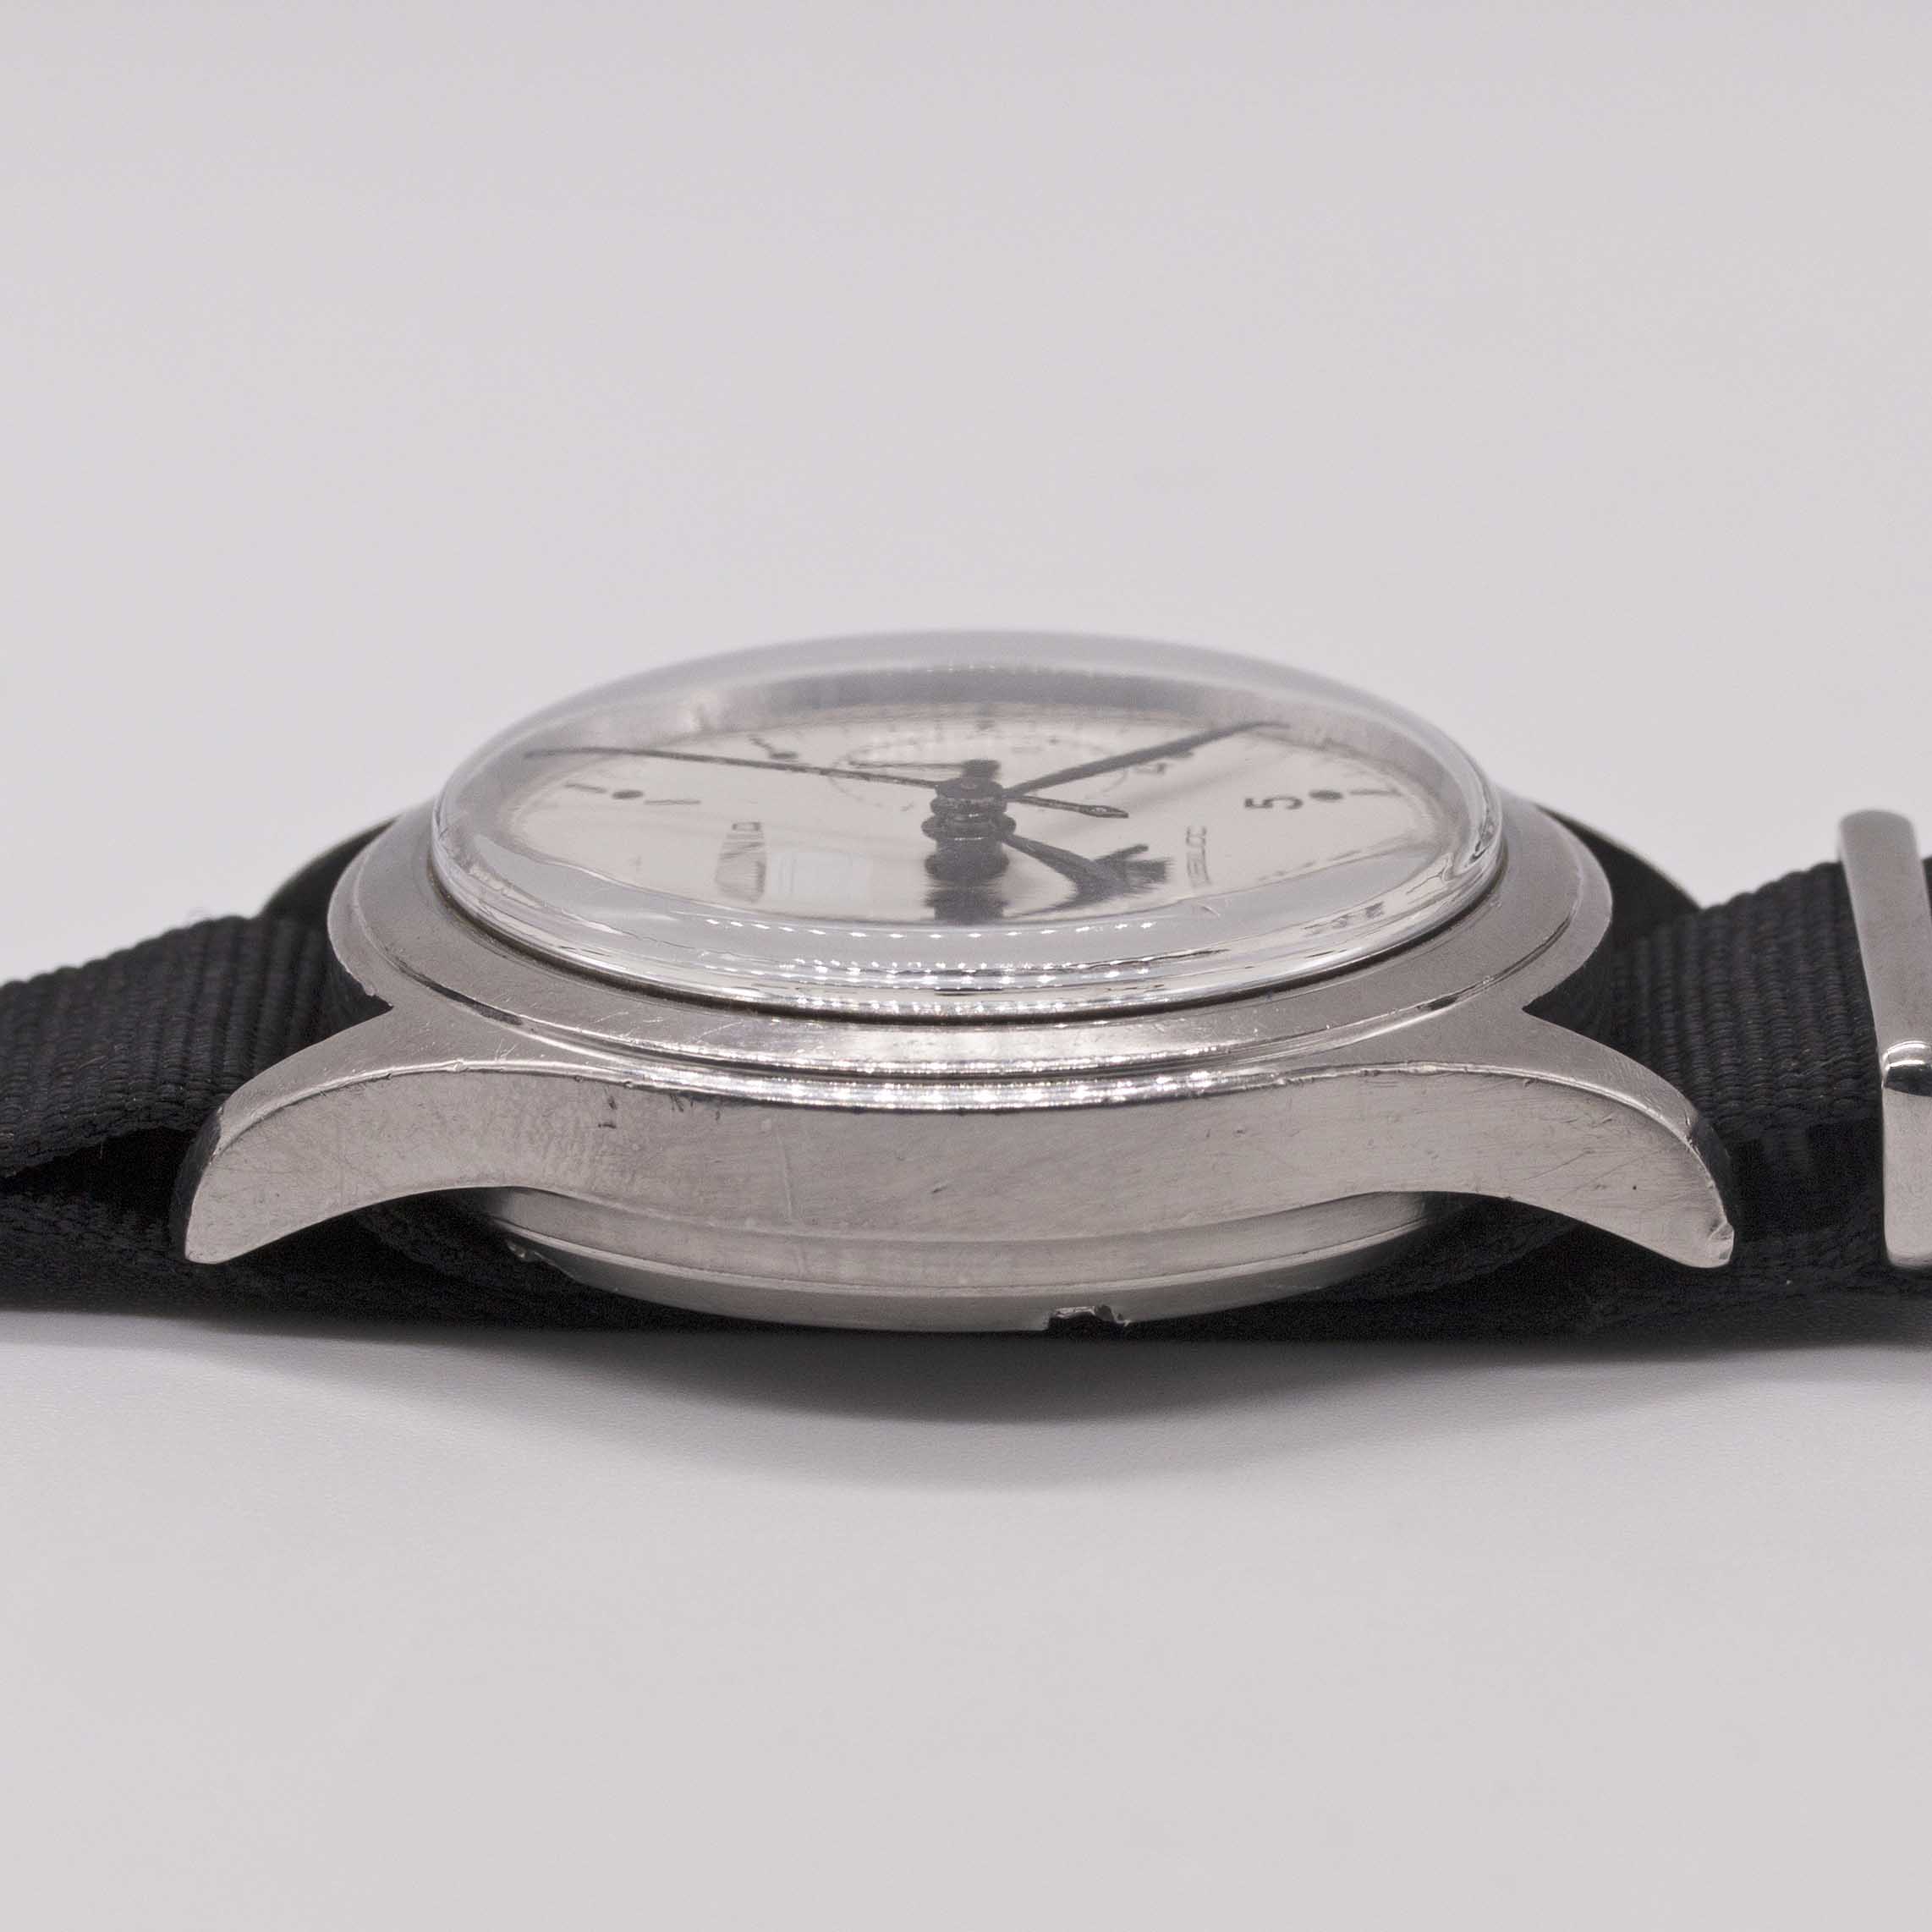 A RARE GENTLEMAN'S STAINLESS STEEL BRITISH MILITARY ROYAL NAVY NUCLEAR SUBMARINE LEMANIA SINGLE - Image 10 of 10